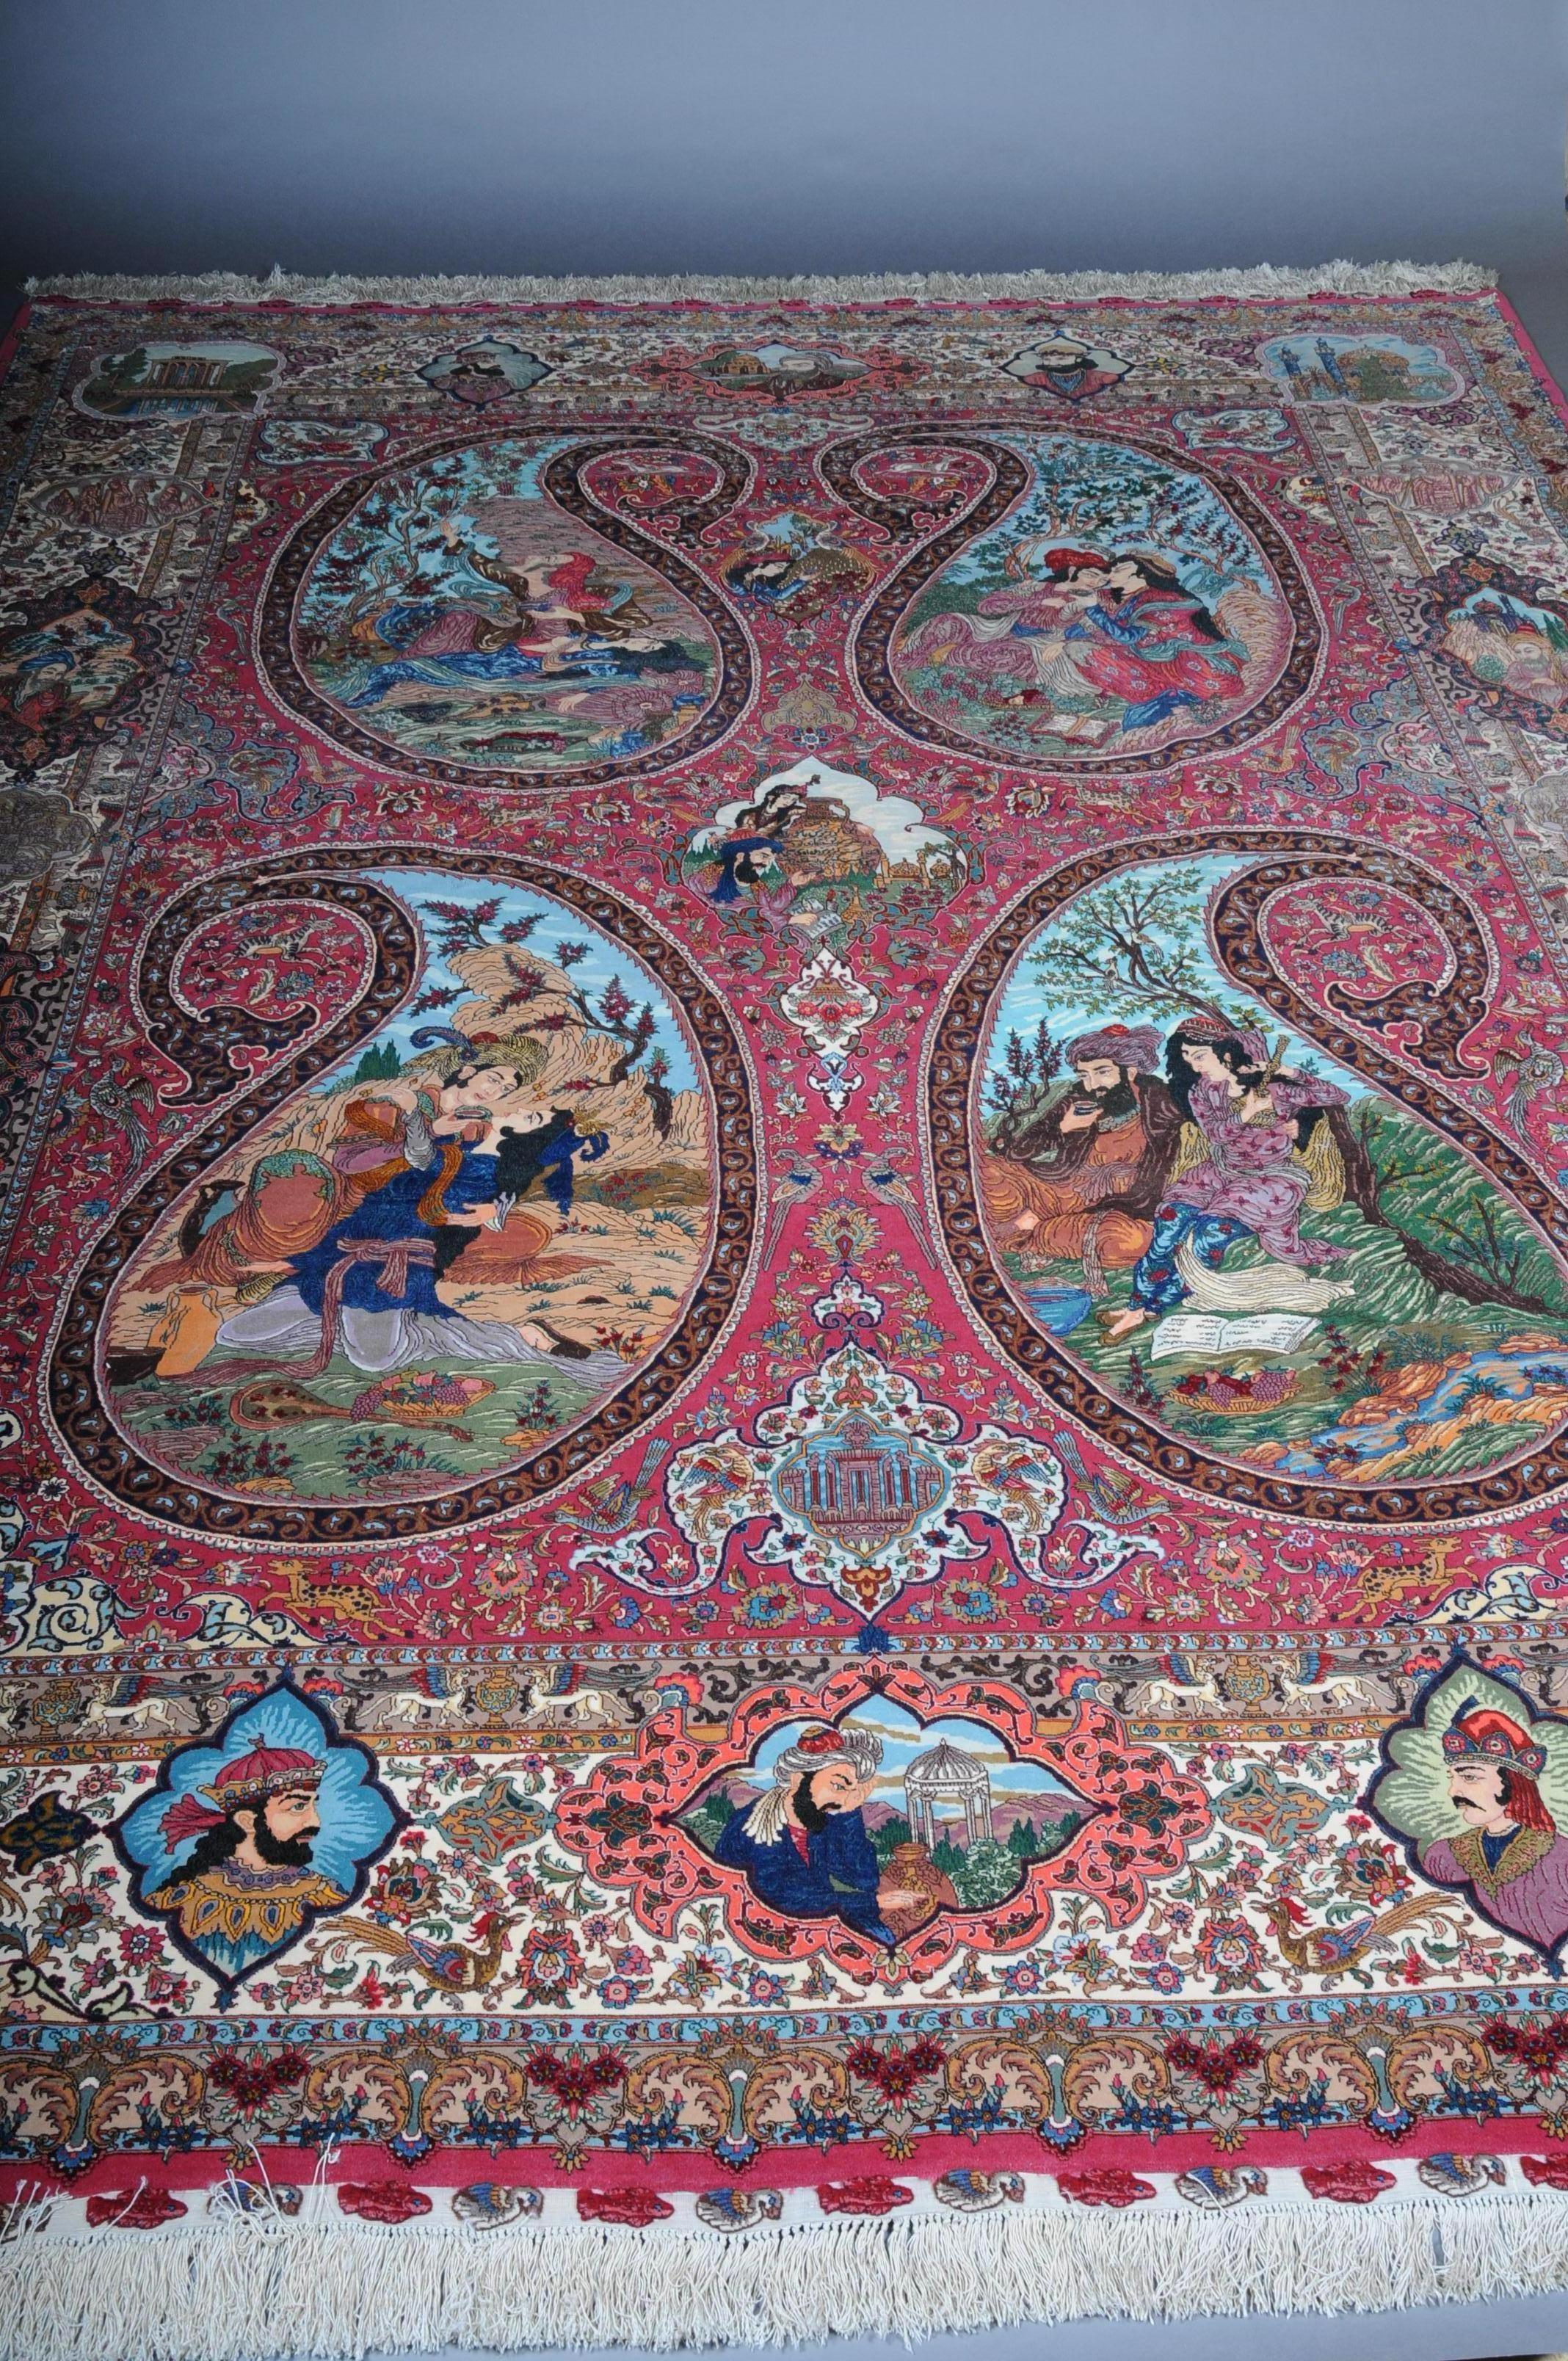 Original Persian palace carpet Tabriz cork wool with silk

Unique, monumental Tabriz carpet made of cork wool with silk. Extremely finely knotted. In the center of the carpet, 4 medallion-shaped figures. This carpet is in an unused condition. Just